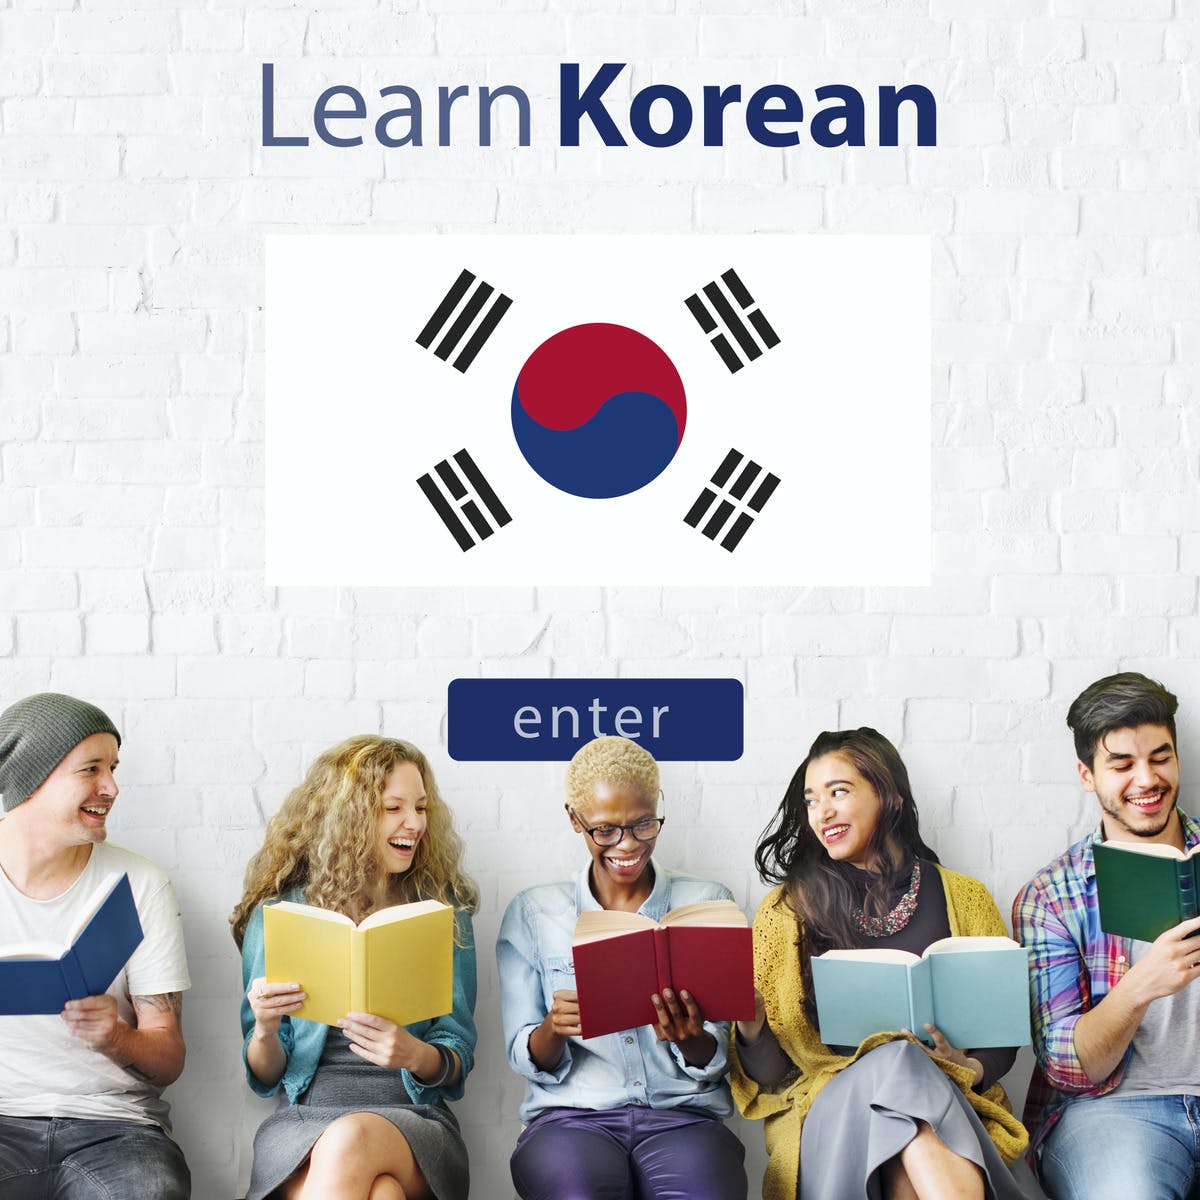 Why one should prefer online Korean classes?